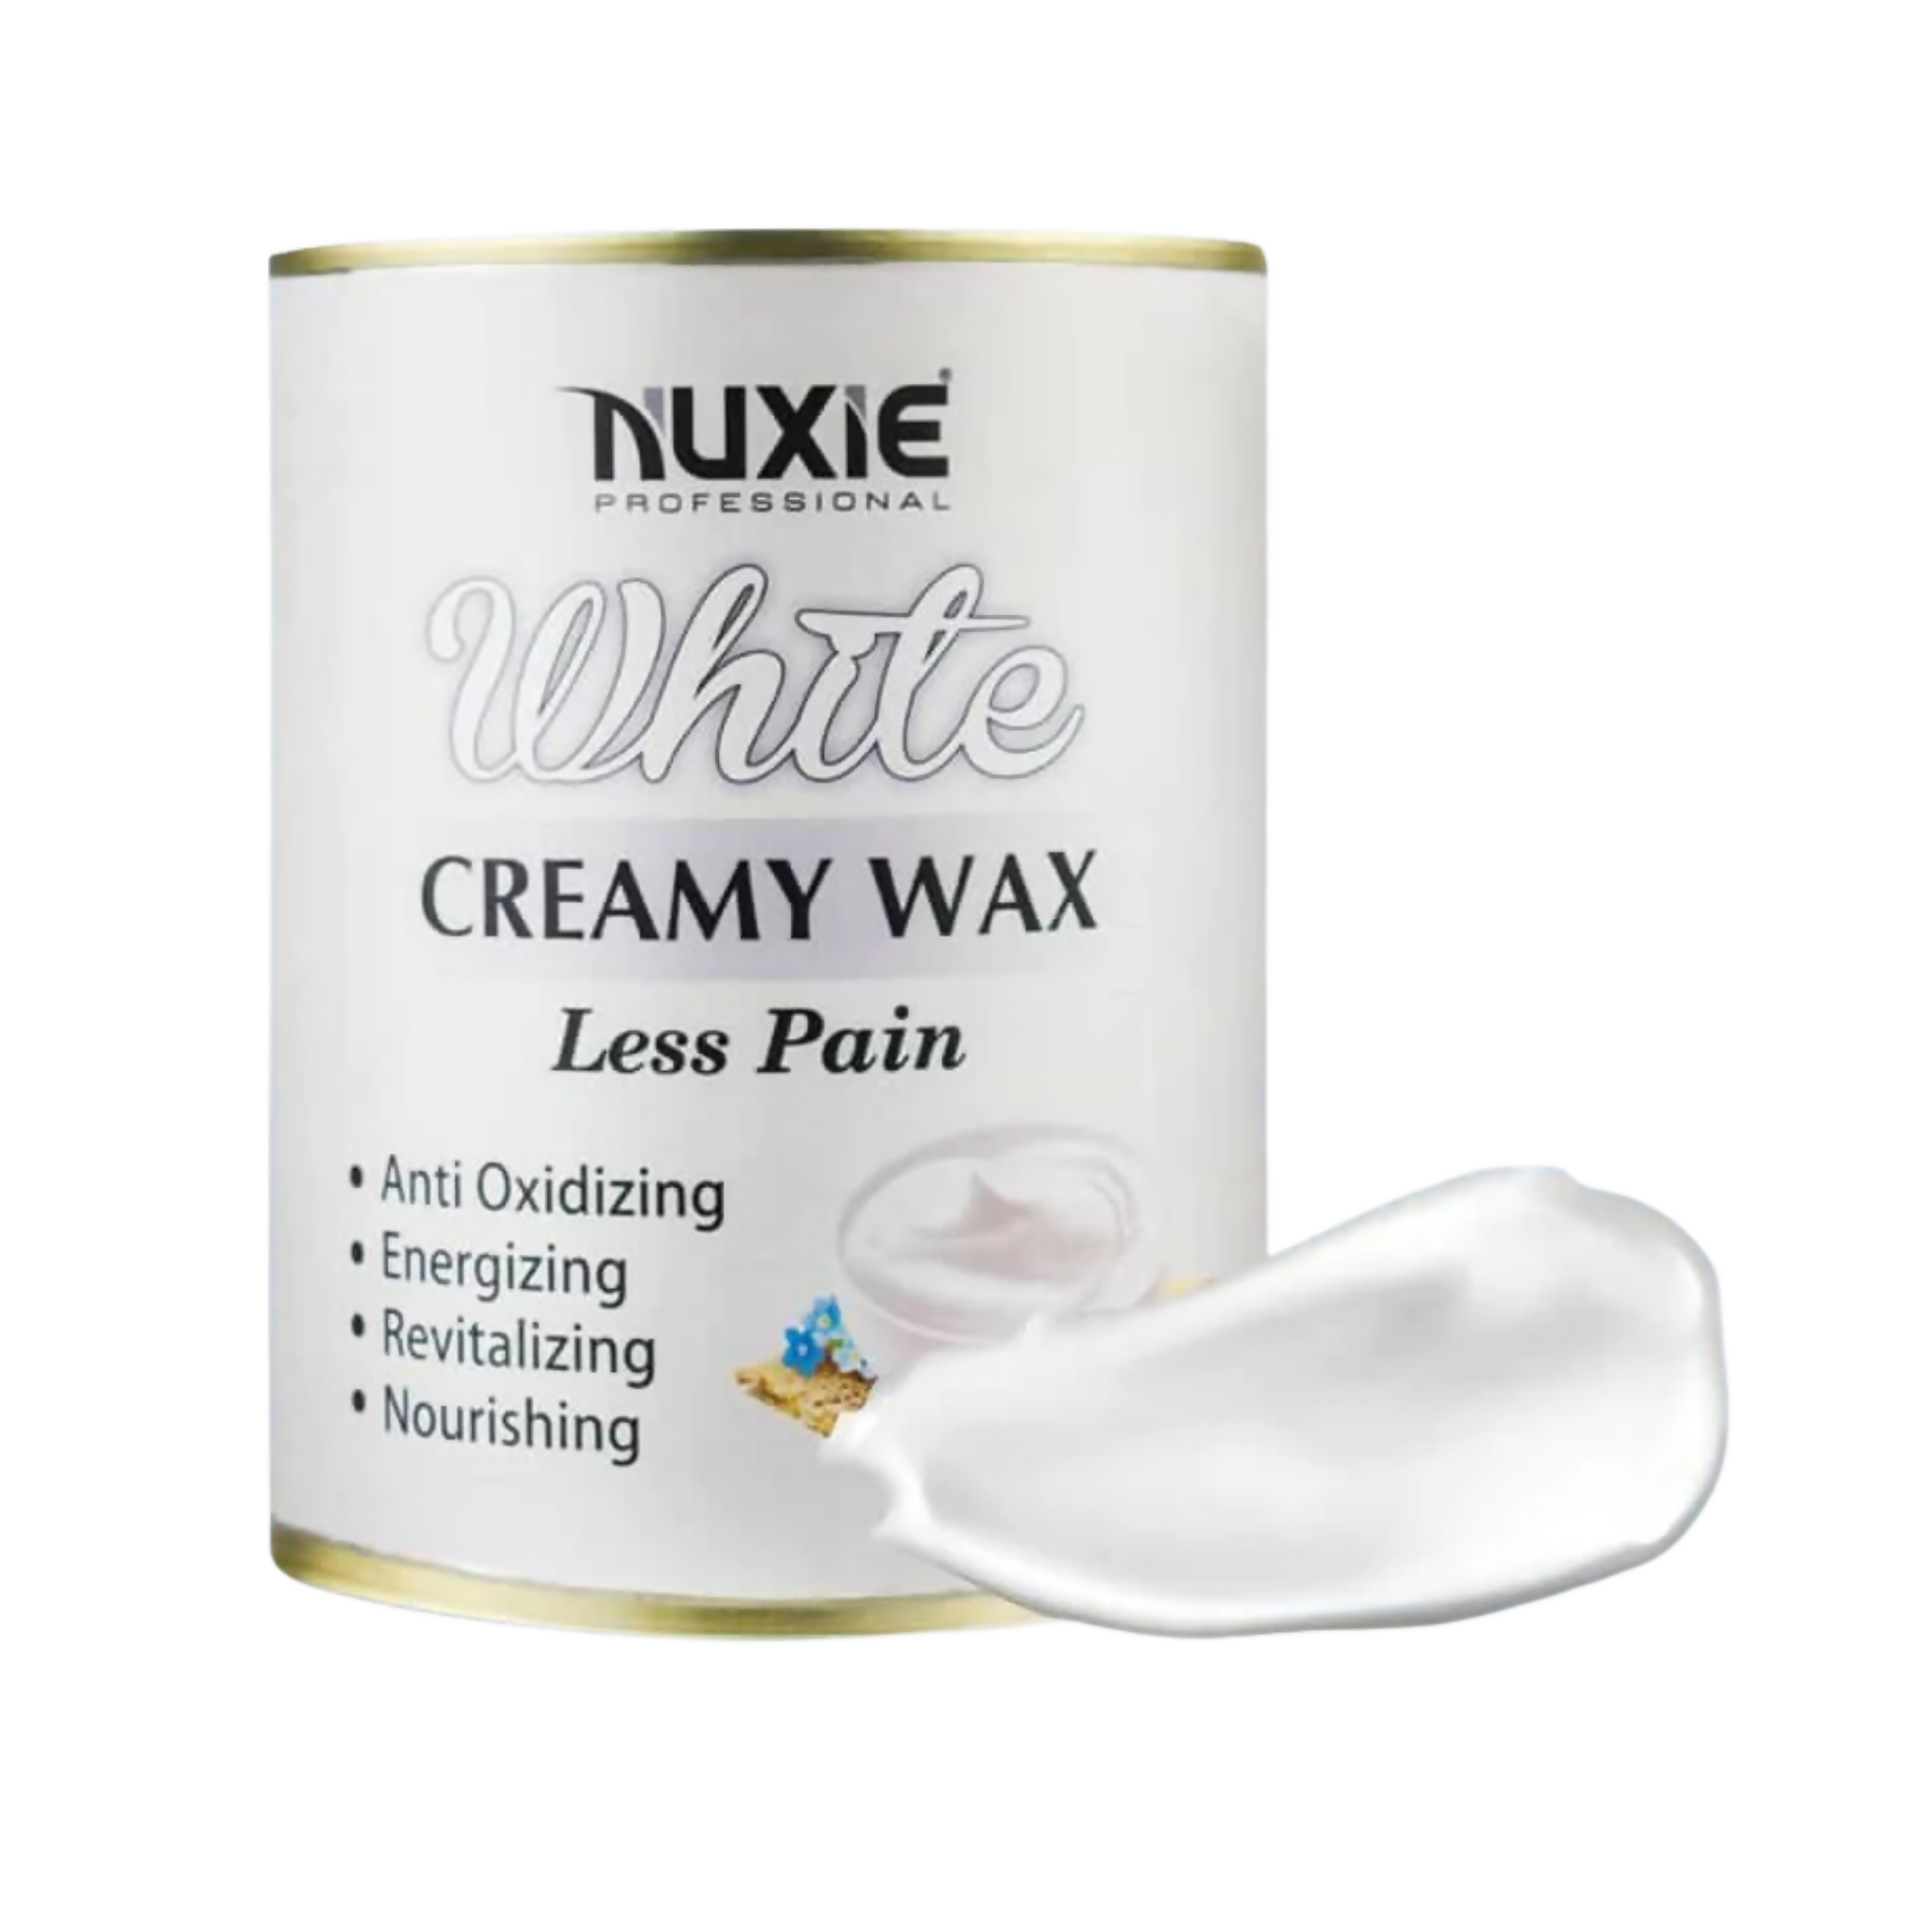 Nuxie White Creamy Wax Less Pain, Hair Removal, for All Skin